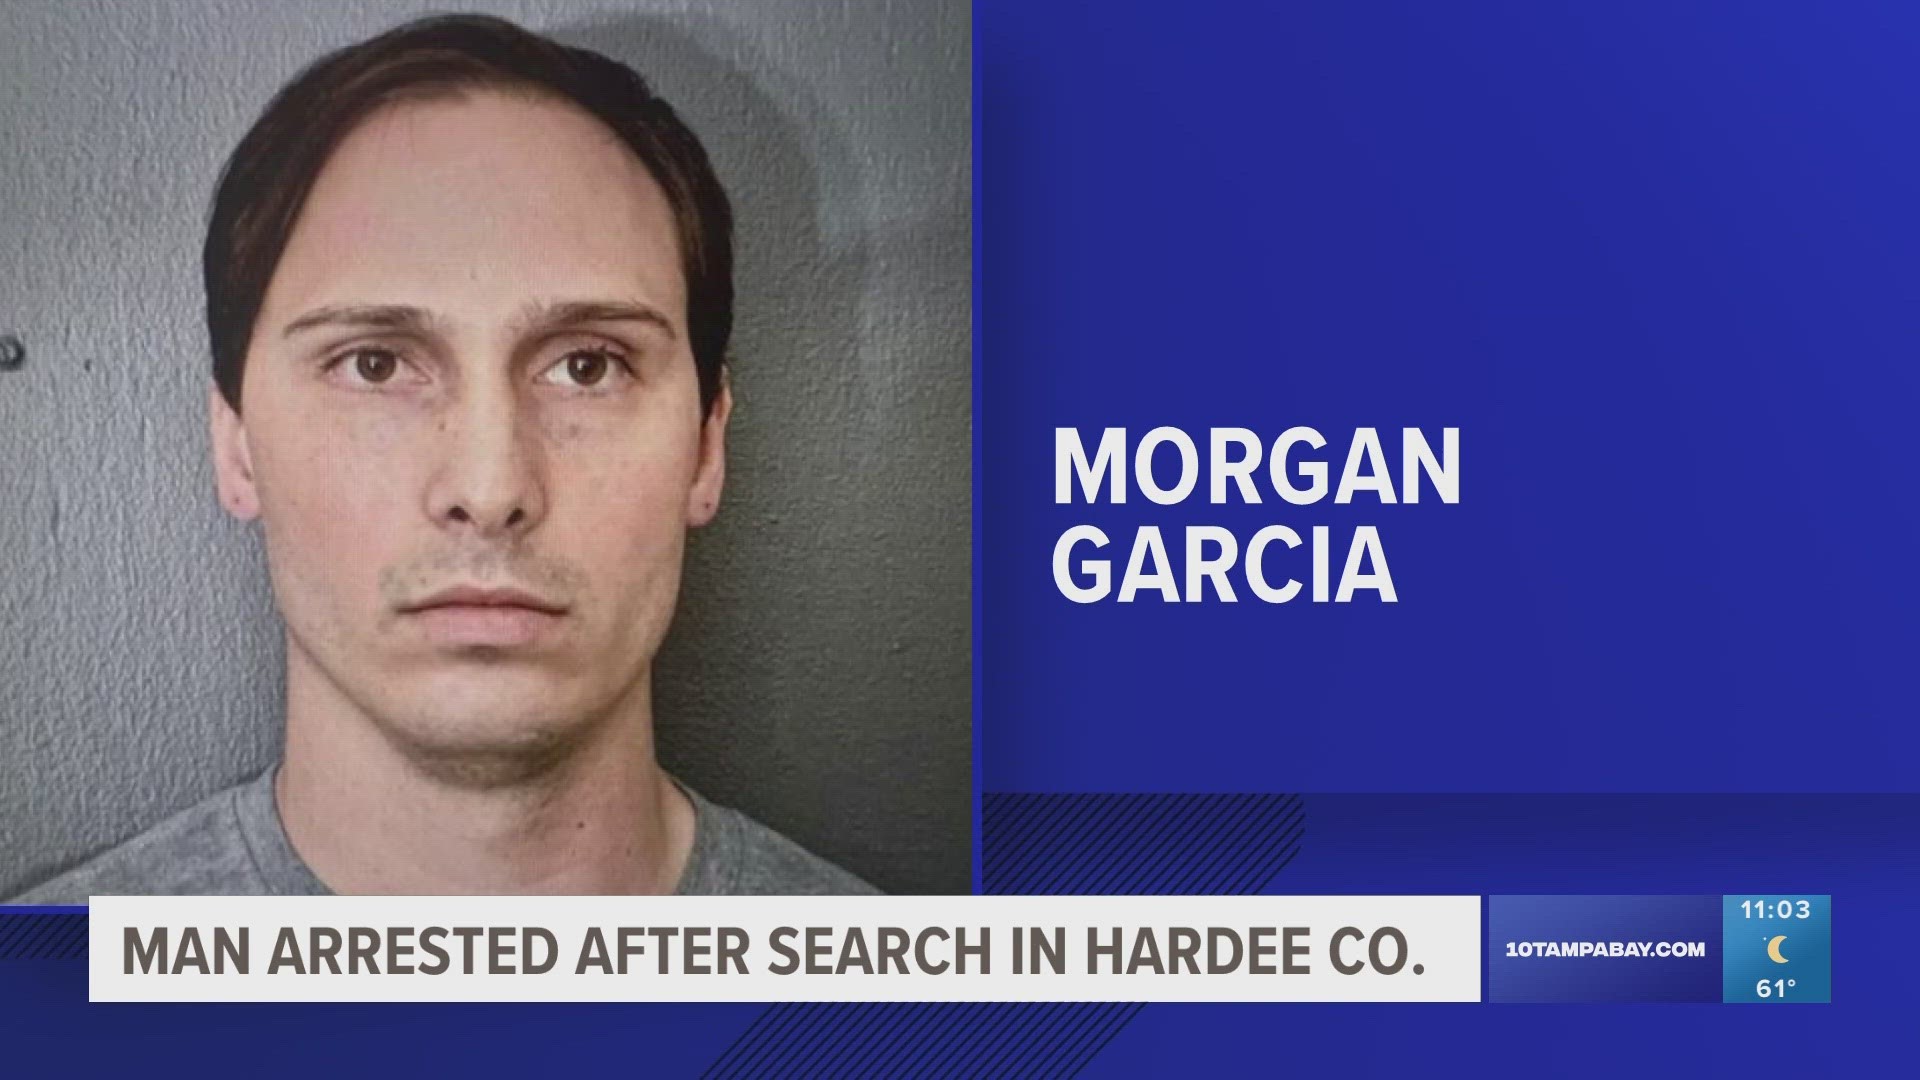 Morgan Garcia was arrested without incident on Wednesday afternoon.